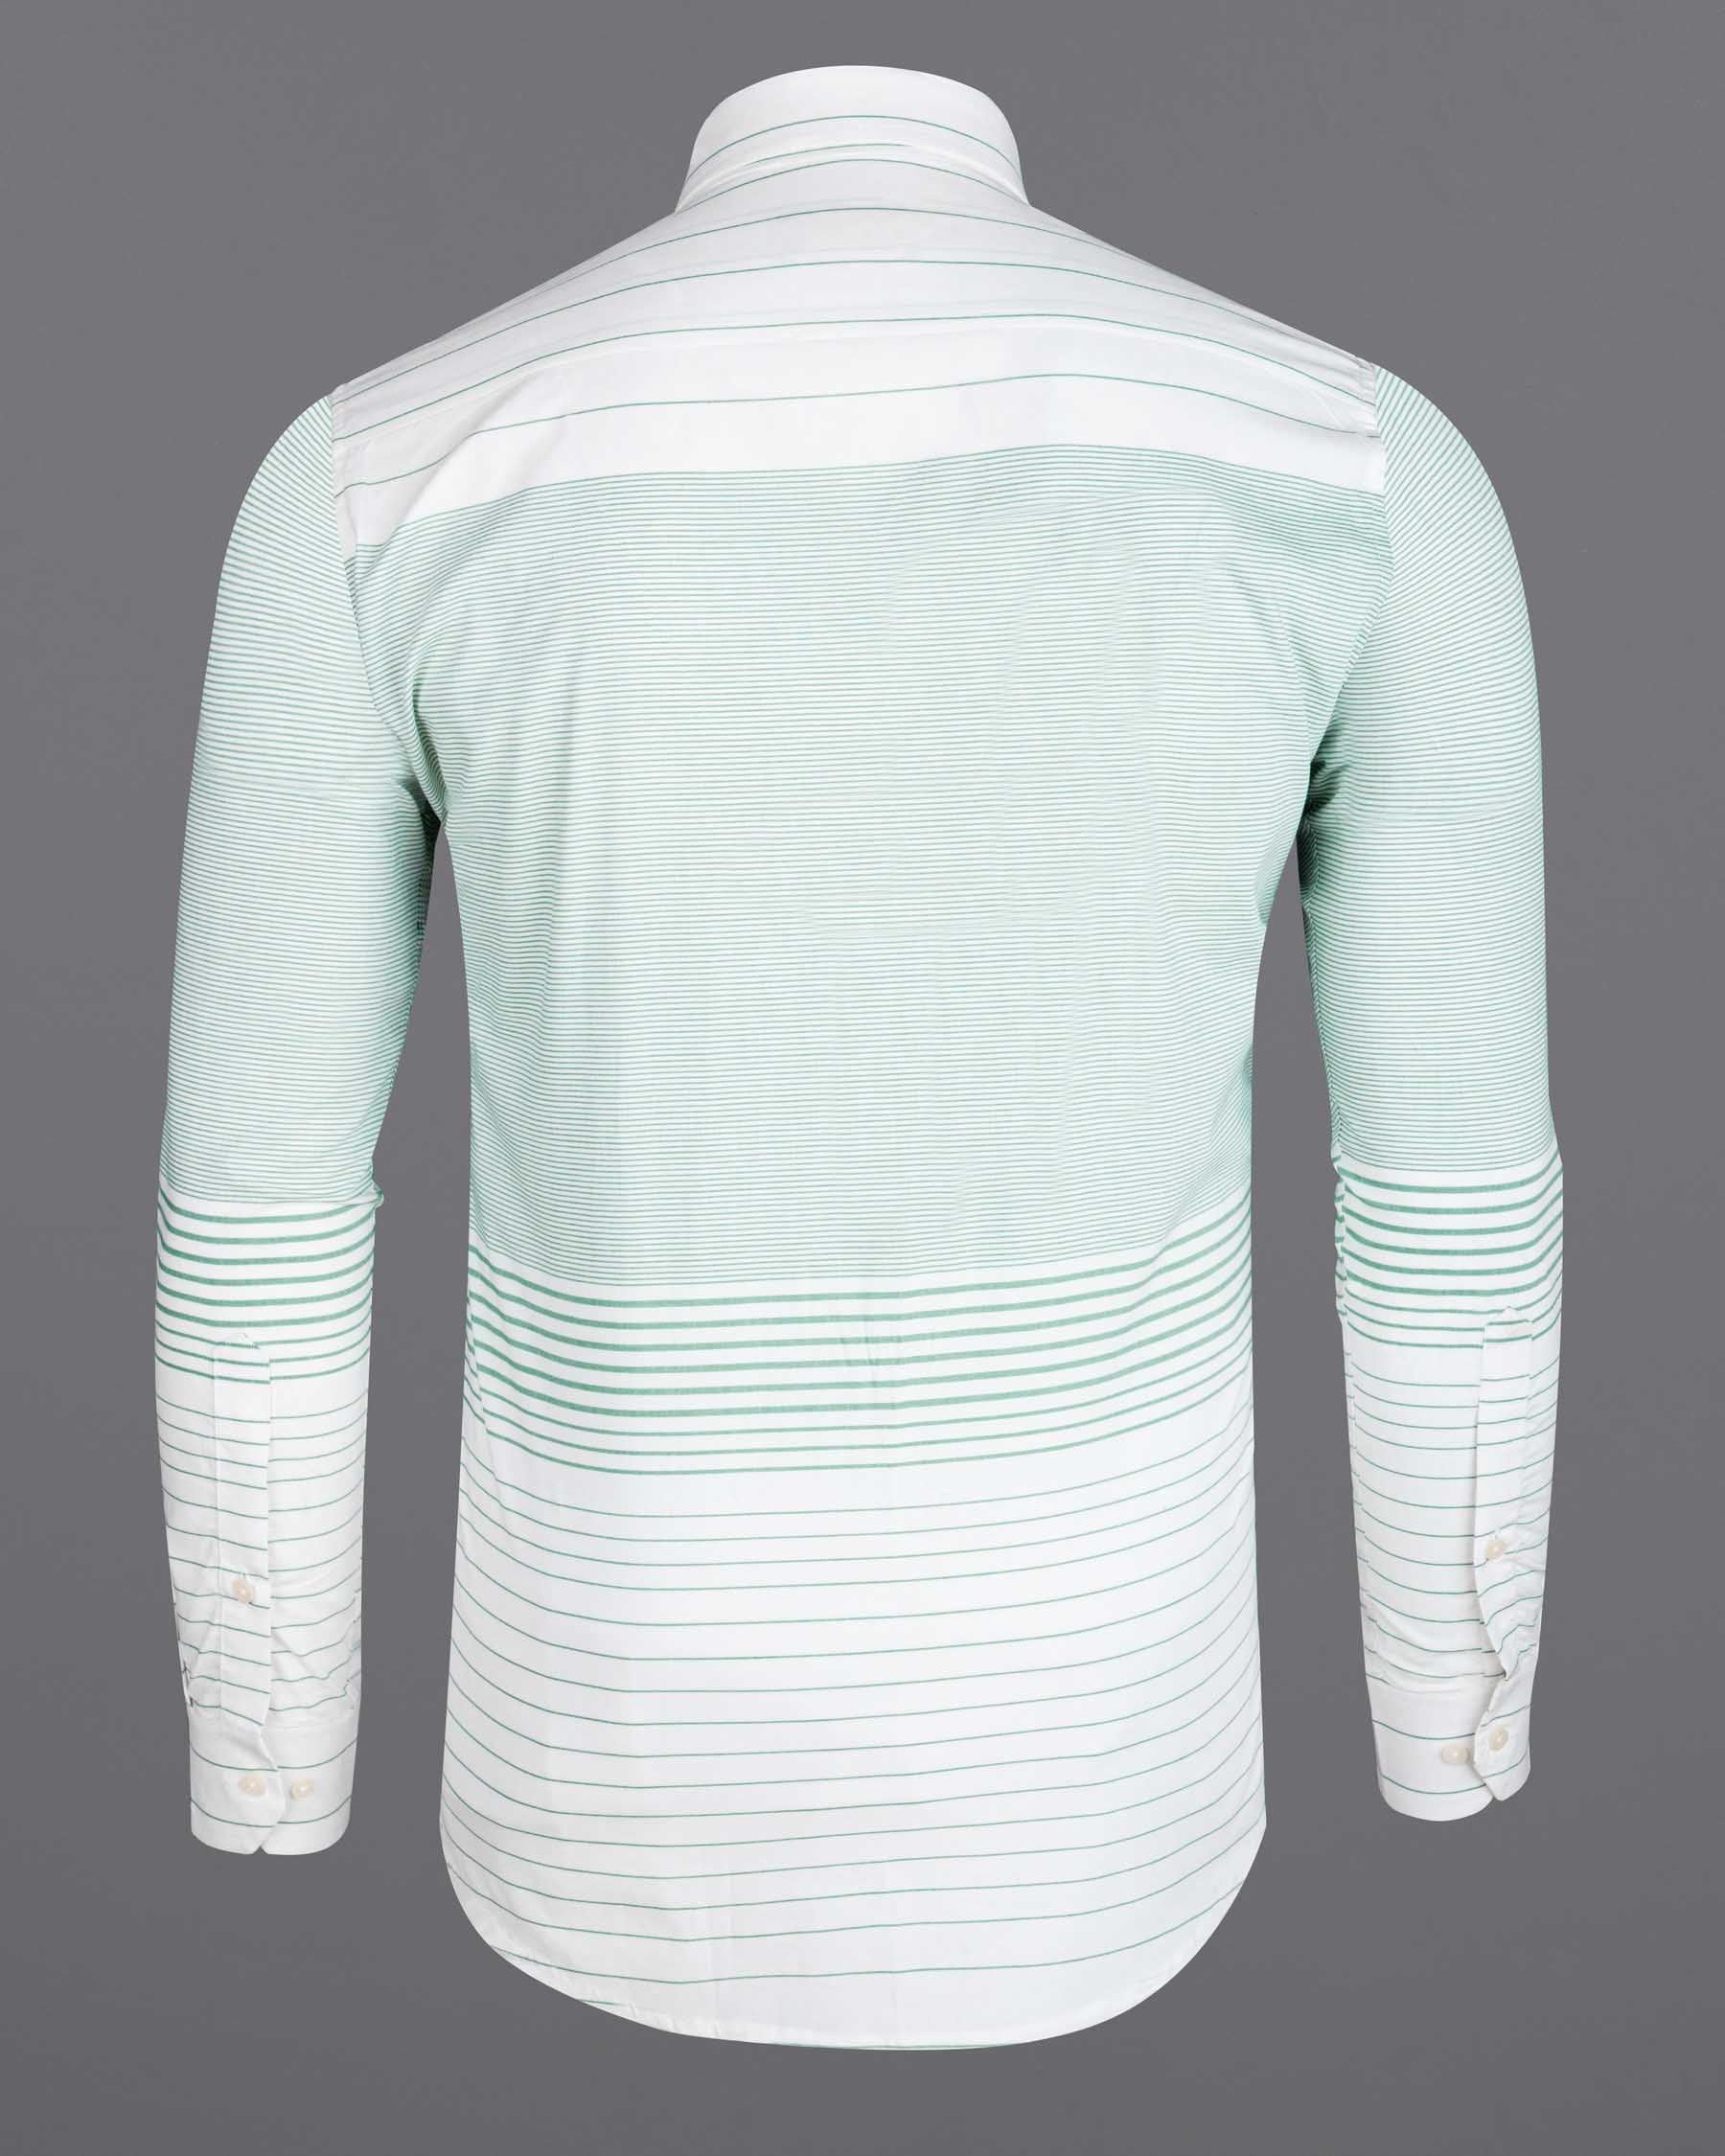 Bright White with Green Horizontal Striped Premium Cotton Shirt 6392-CA-38,6392-CA-H-38,6392-CA-39,6392-CA-H-39,6392-CA-40,6392-CA-H-40,6392-CA-42,6392-CA-H-42,6392-CA-44,6392-CA-H-44,6392-CA-46,6392-CA-H-46,6392-CA-48,6392-CA-H-48,6392-CA-50,6392-CA-H-50,6392-CA-52,6392-CA-H-52